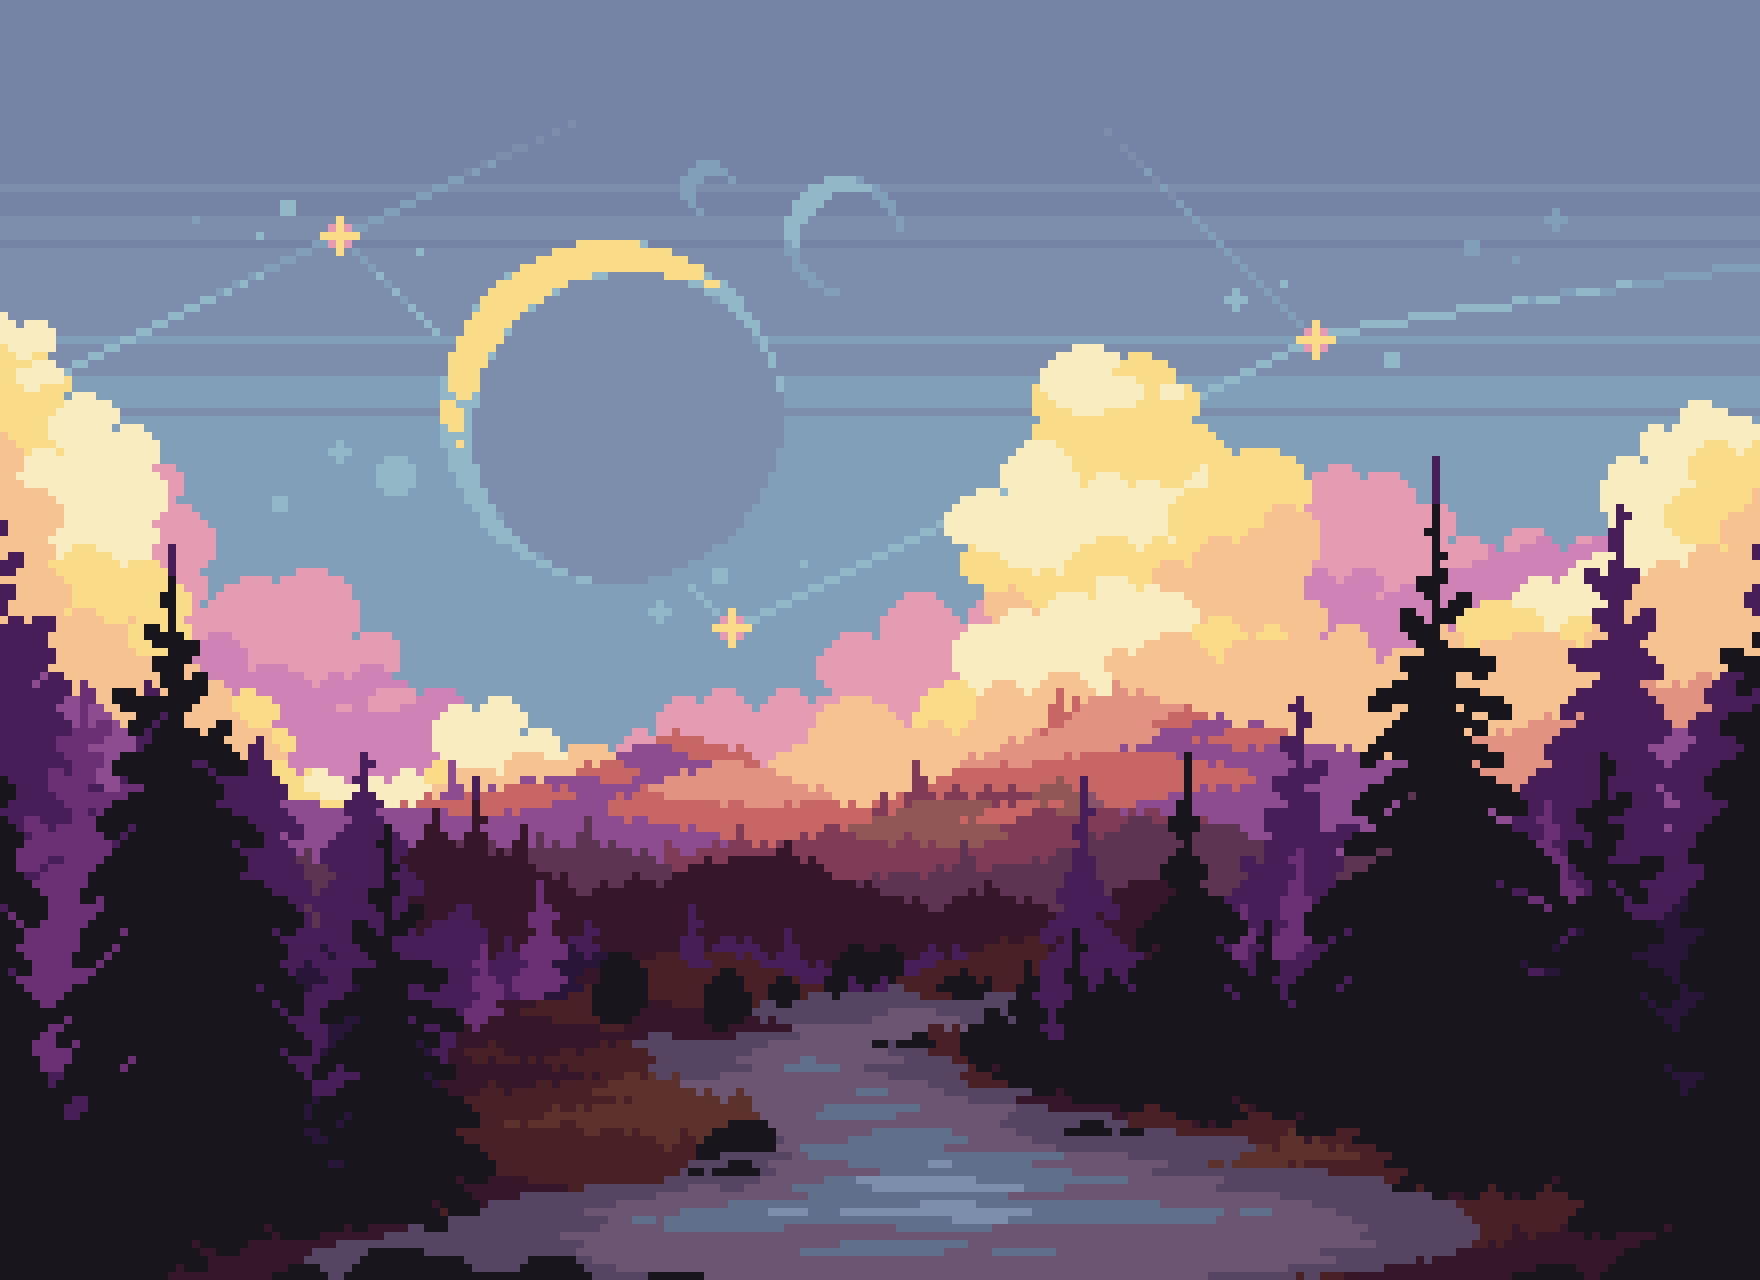 Pixel art of a forest with a river - Pixel art